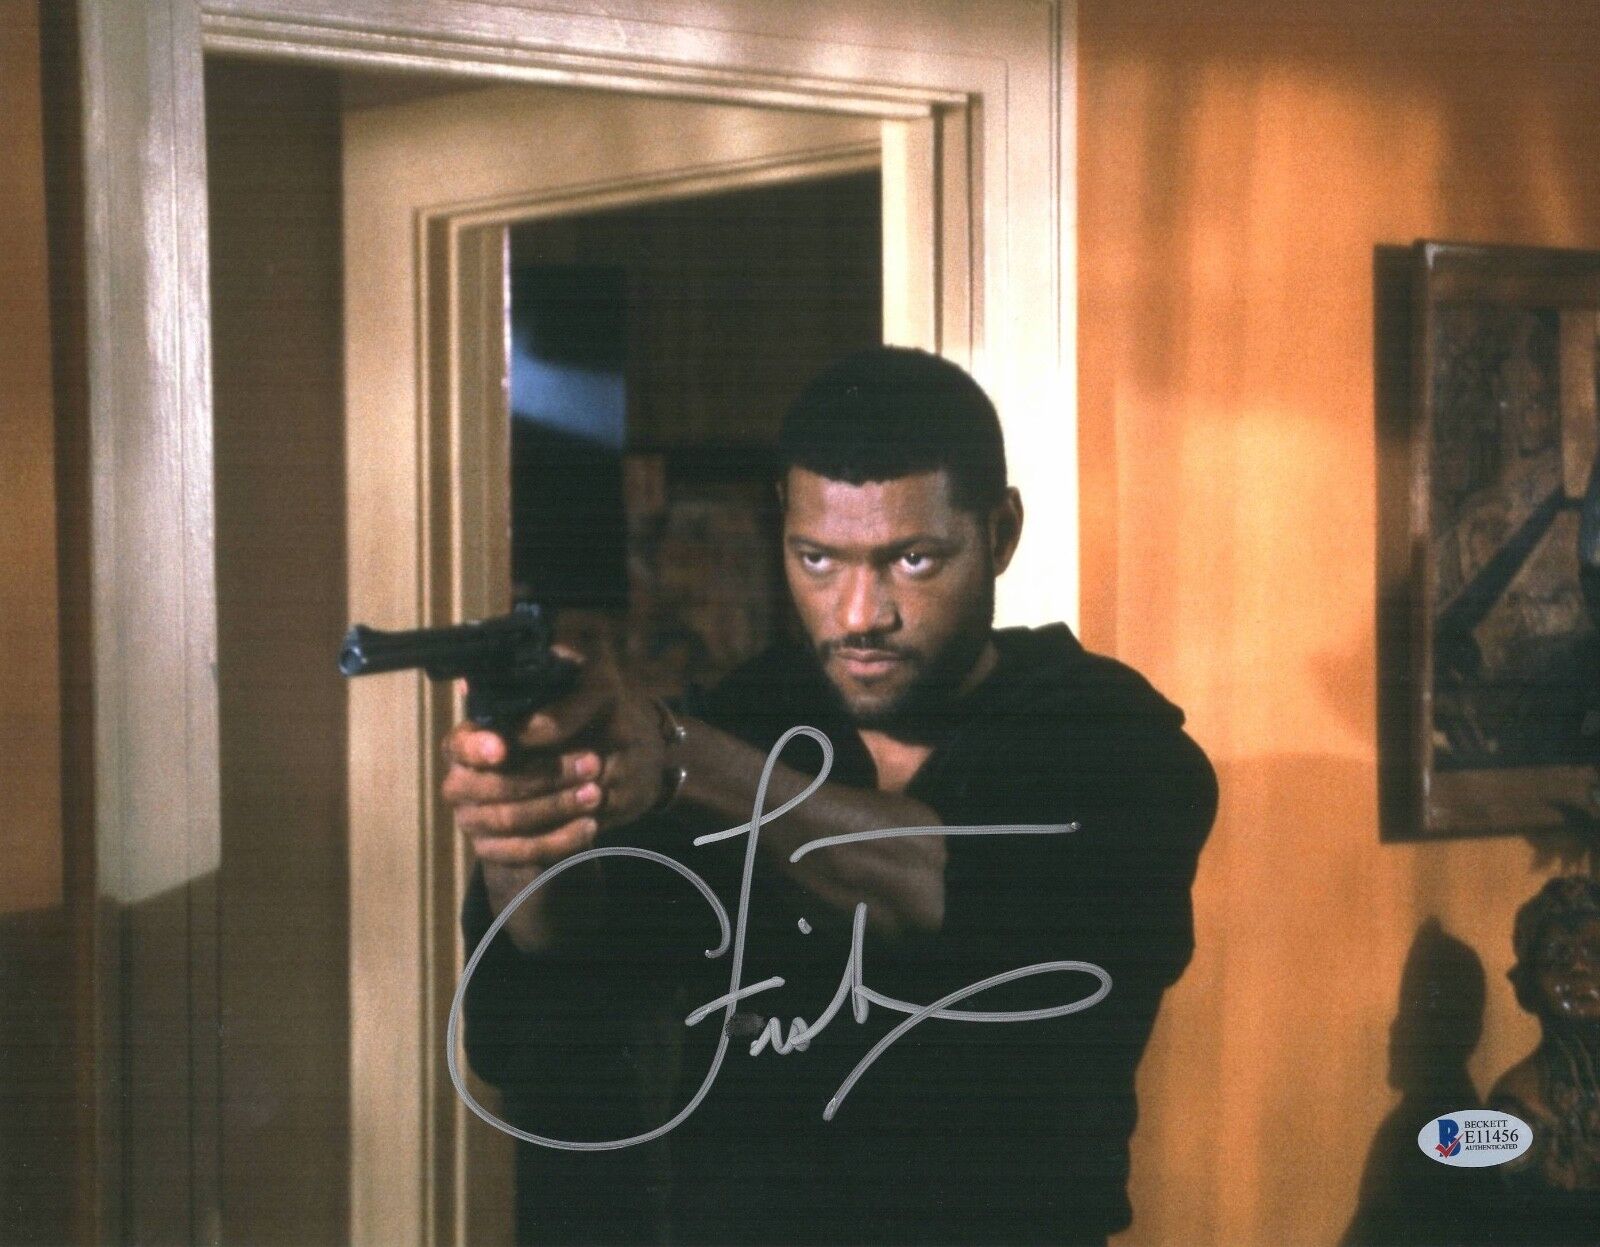 LAURENCE FISHBURNE SIGNED 11X14 PHOTO 'THE MATRIX' AUTHENTIC AUTOGRAPH BECKETT